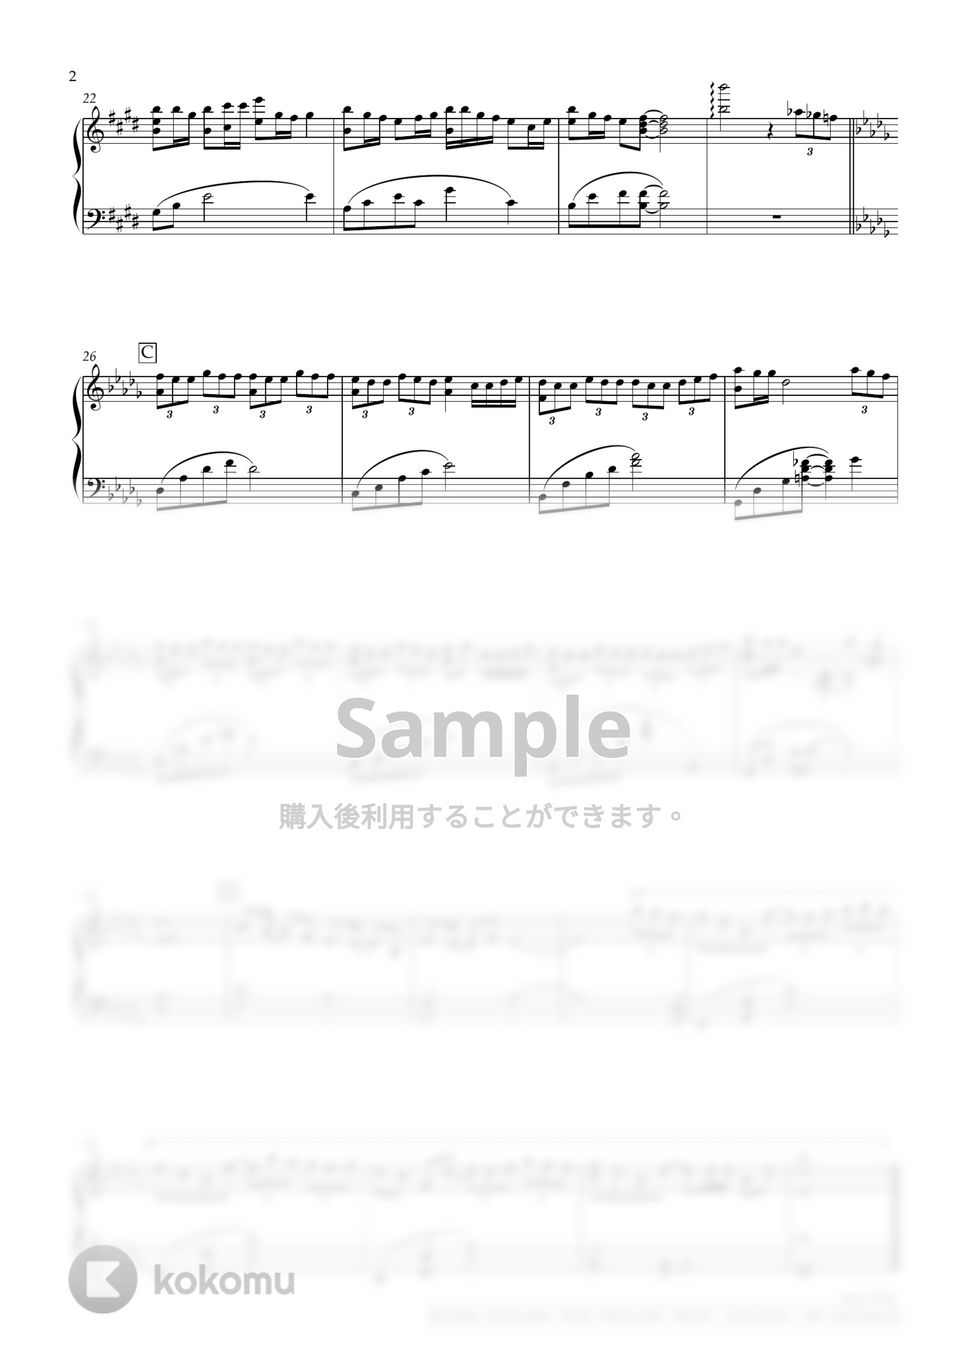 Kis-My-Ft2 - Luv Bias -piano & strings- (『オー！マイ・ボス！恋は別冊で』) by sammy